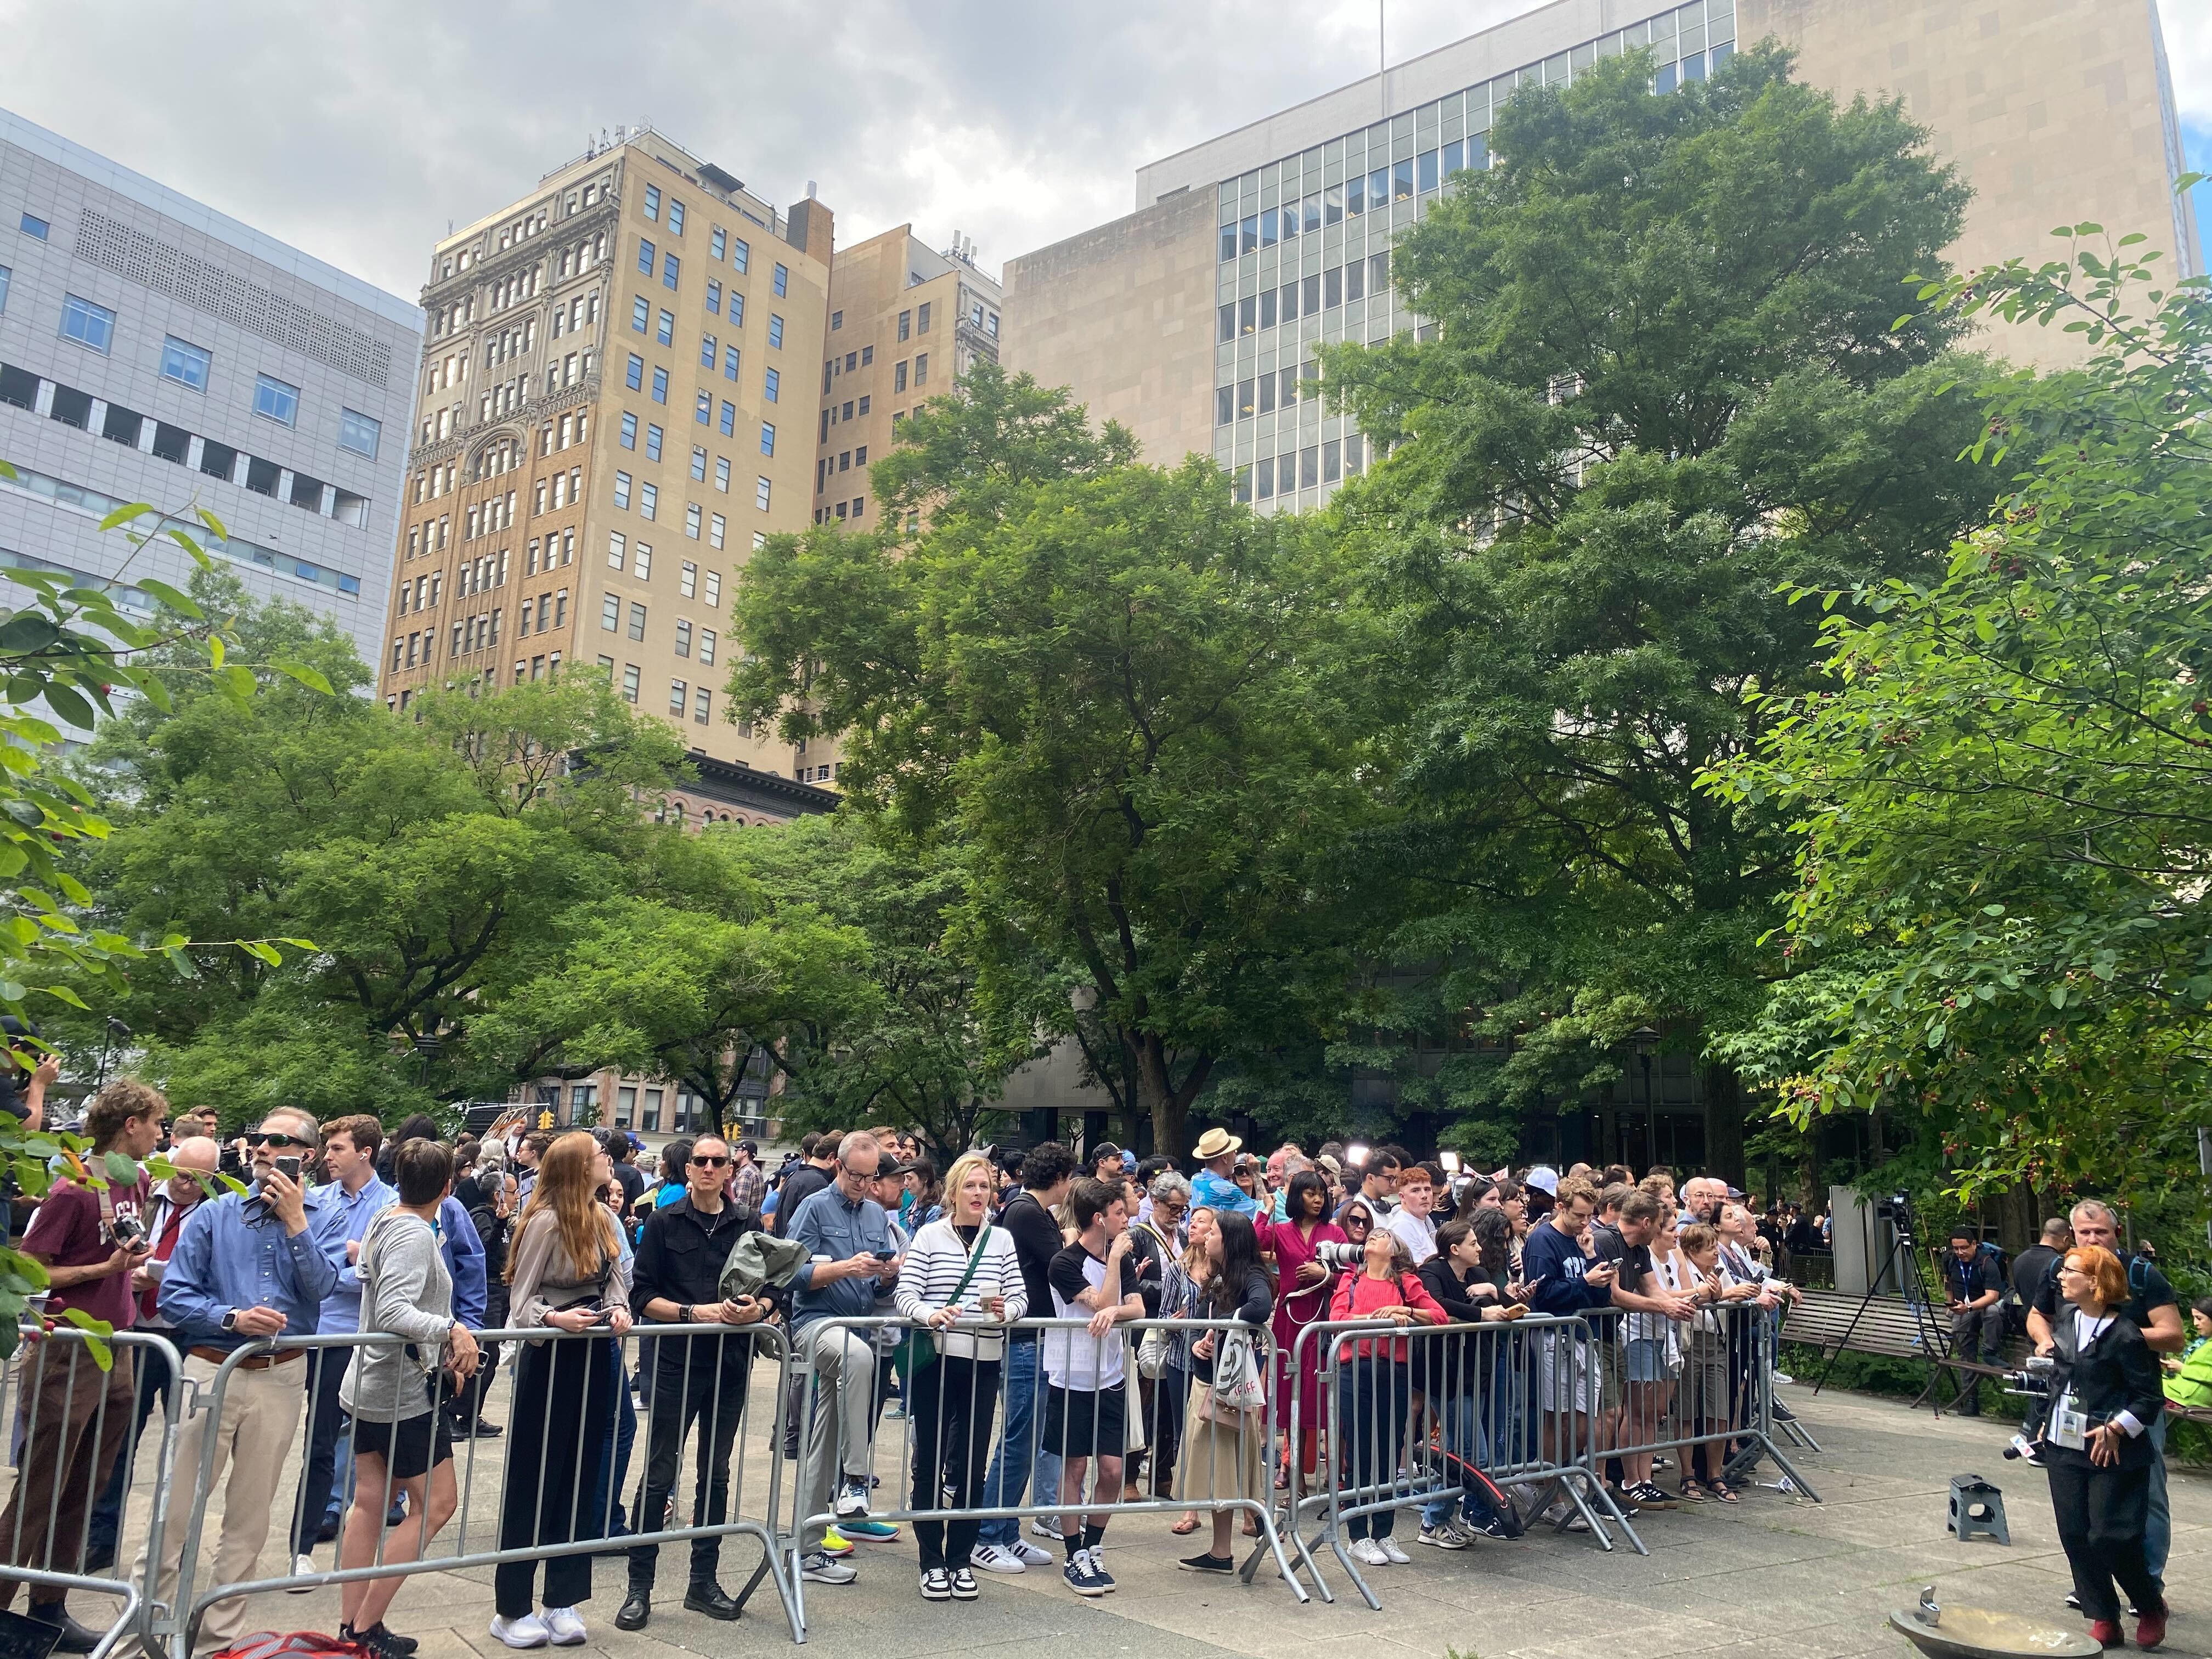 Crowds gather outside the Manhattan courthouse moments after Donald Trump was convicted of 34 counts of falsifying business records